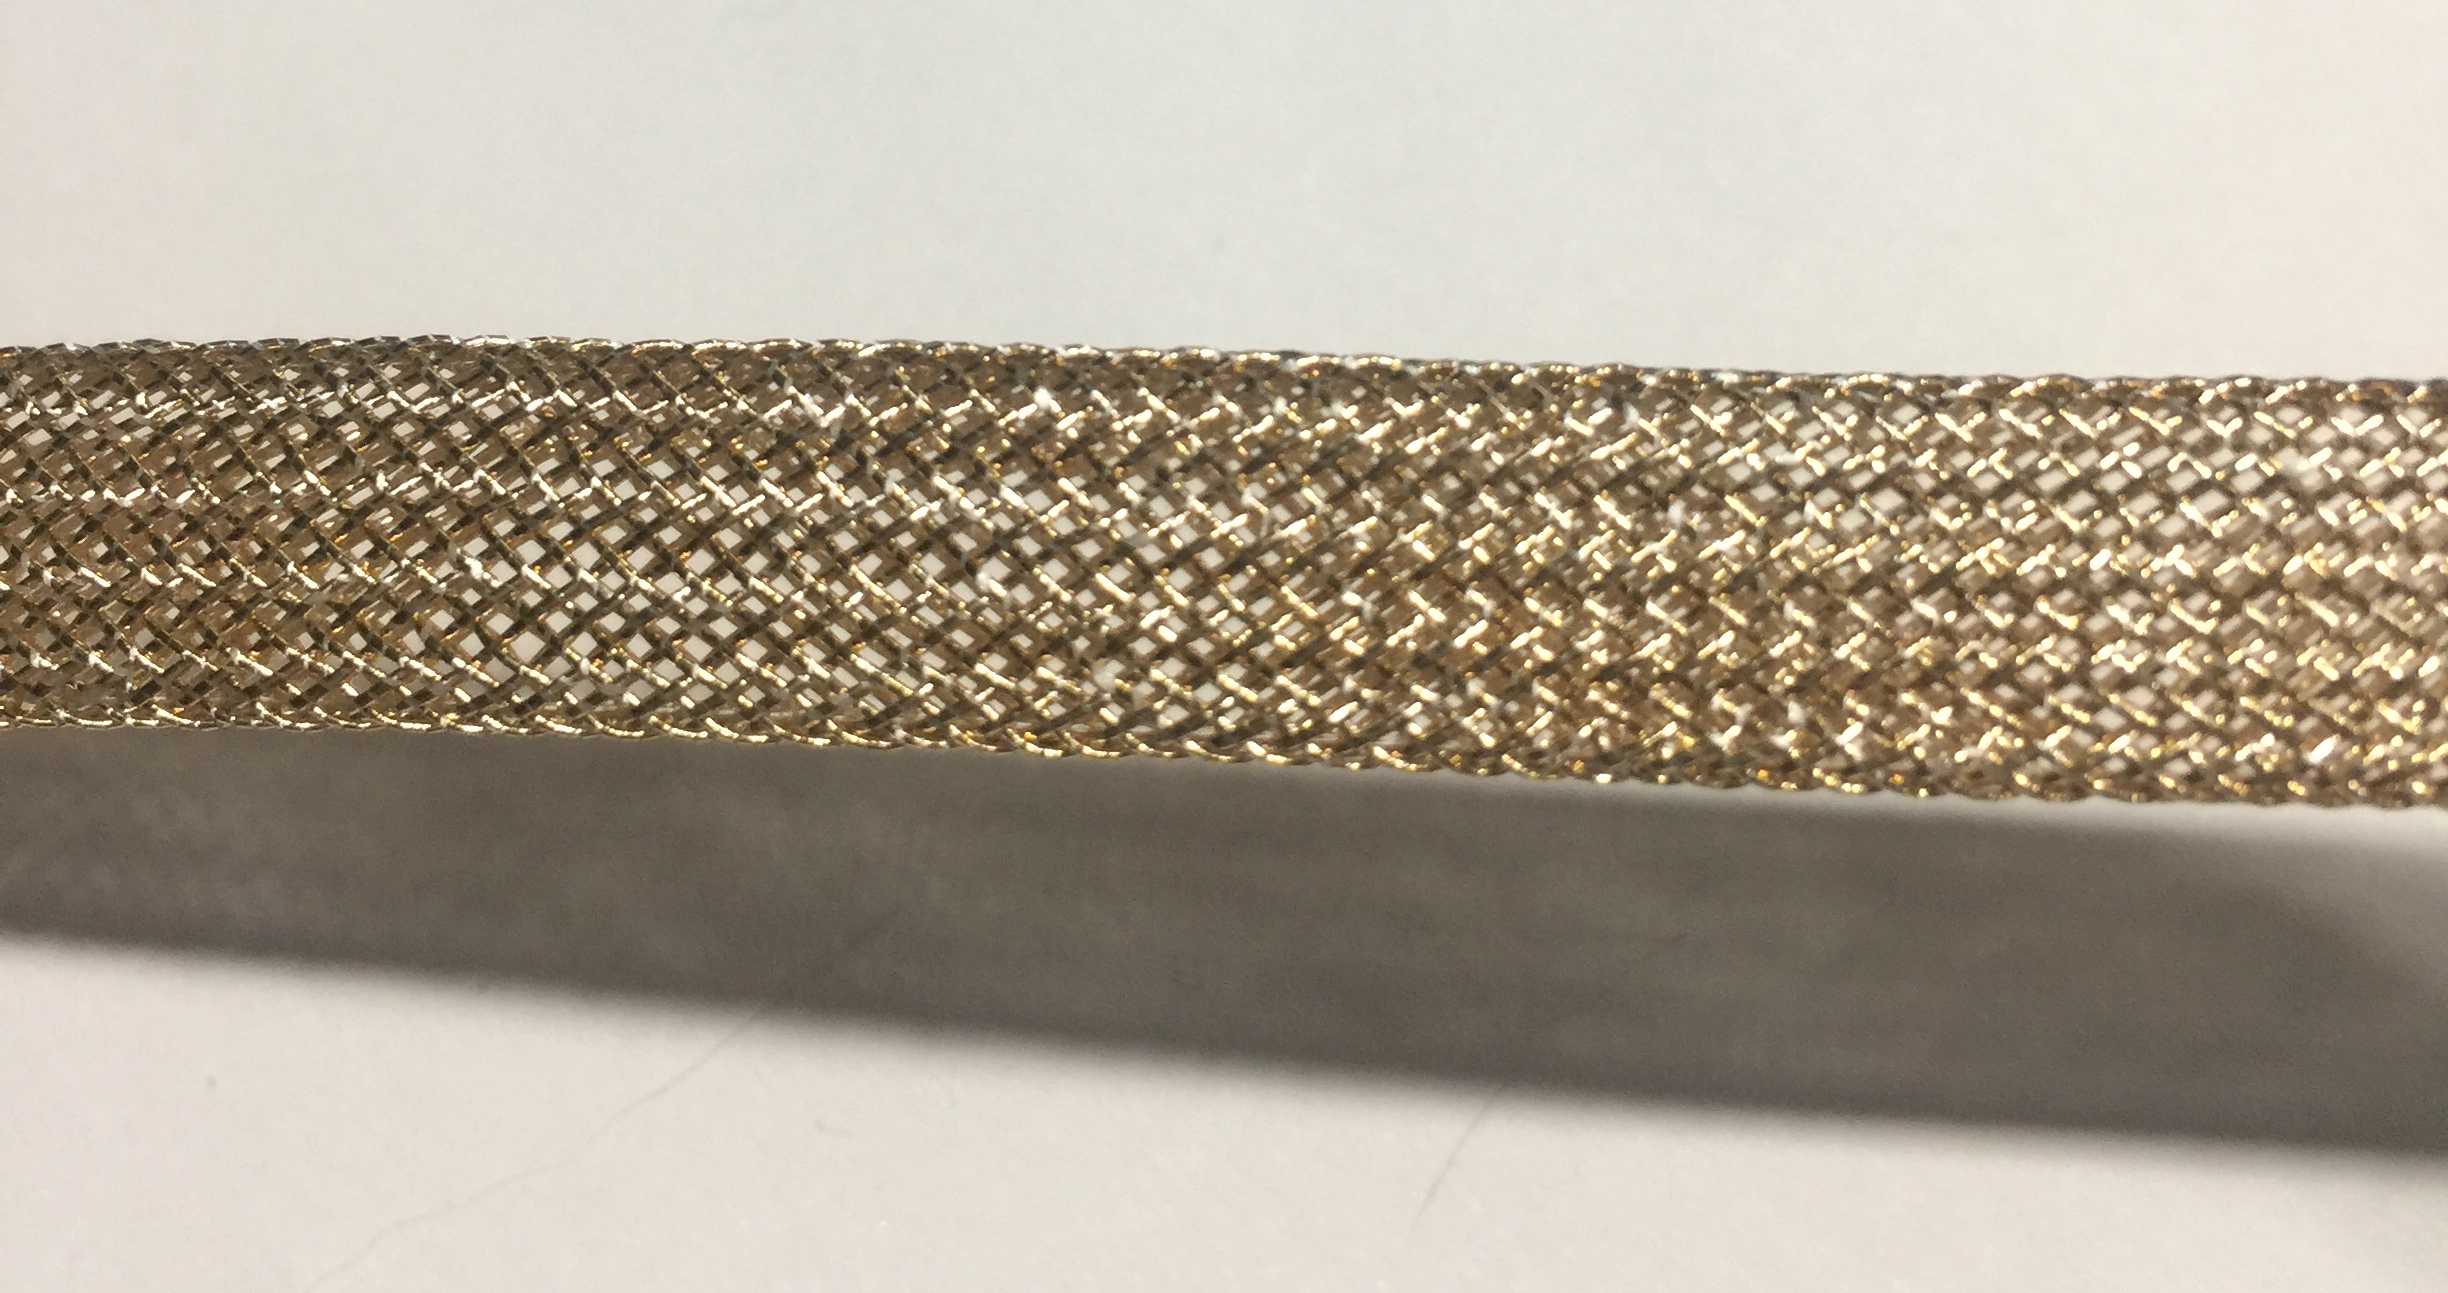 Metall Mesh Band - rosgold - 10x2mm